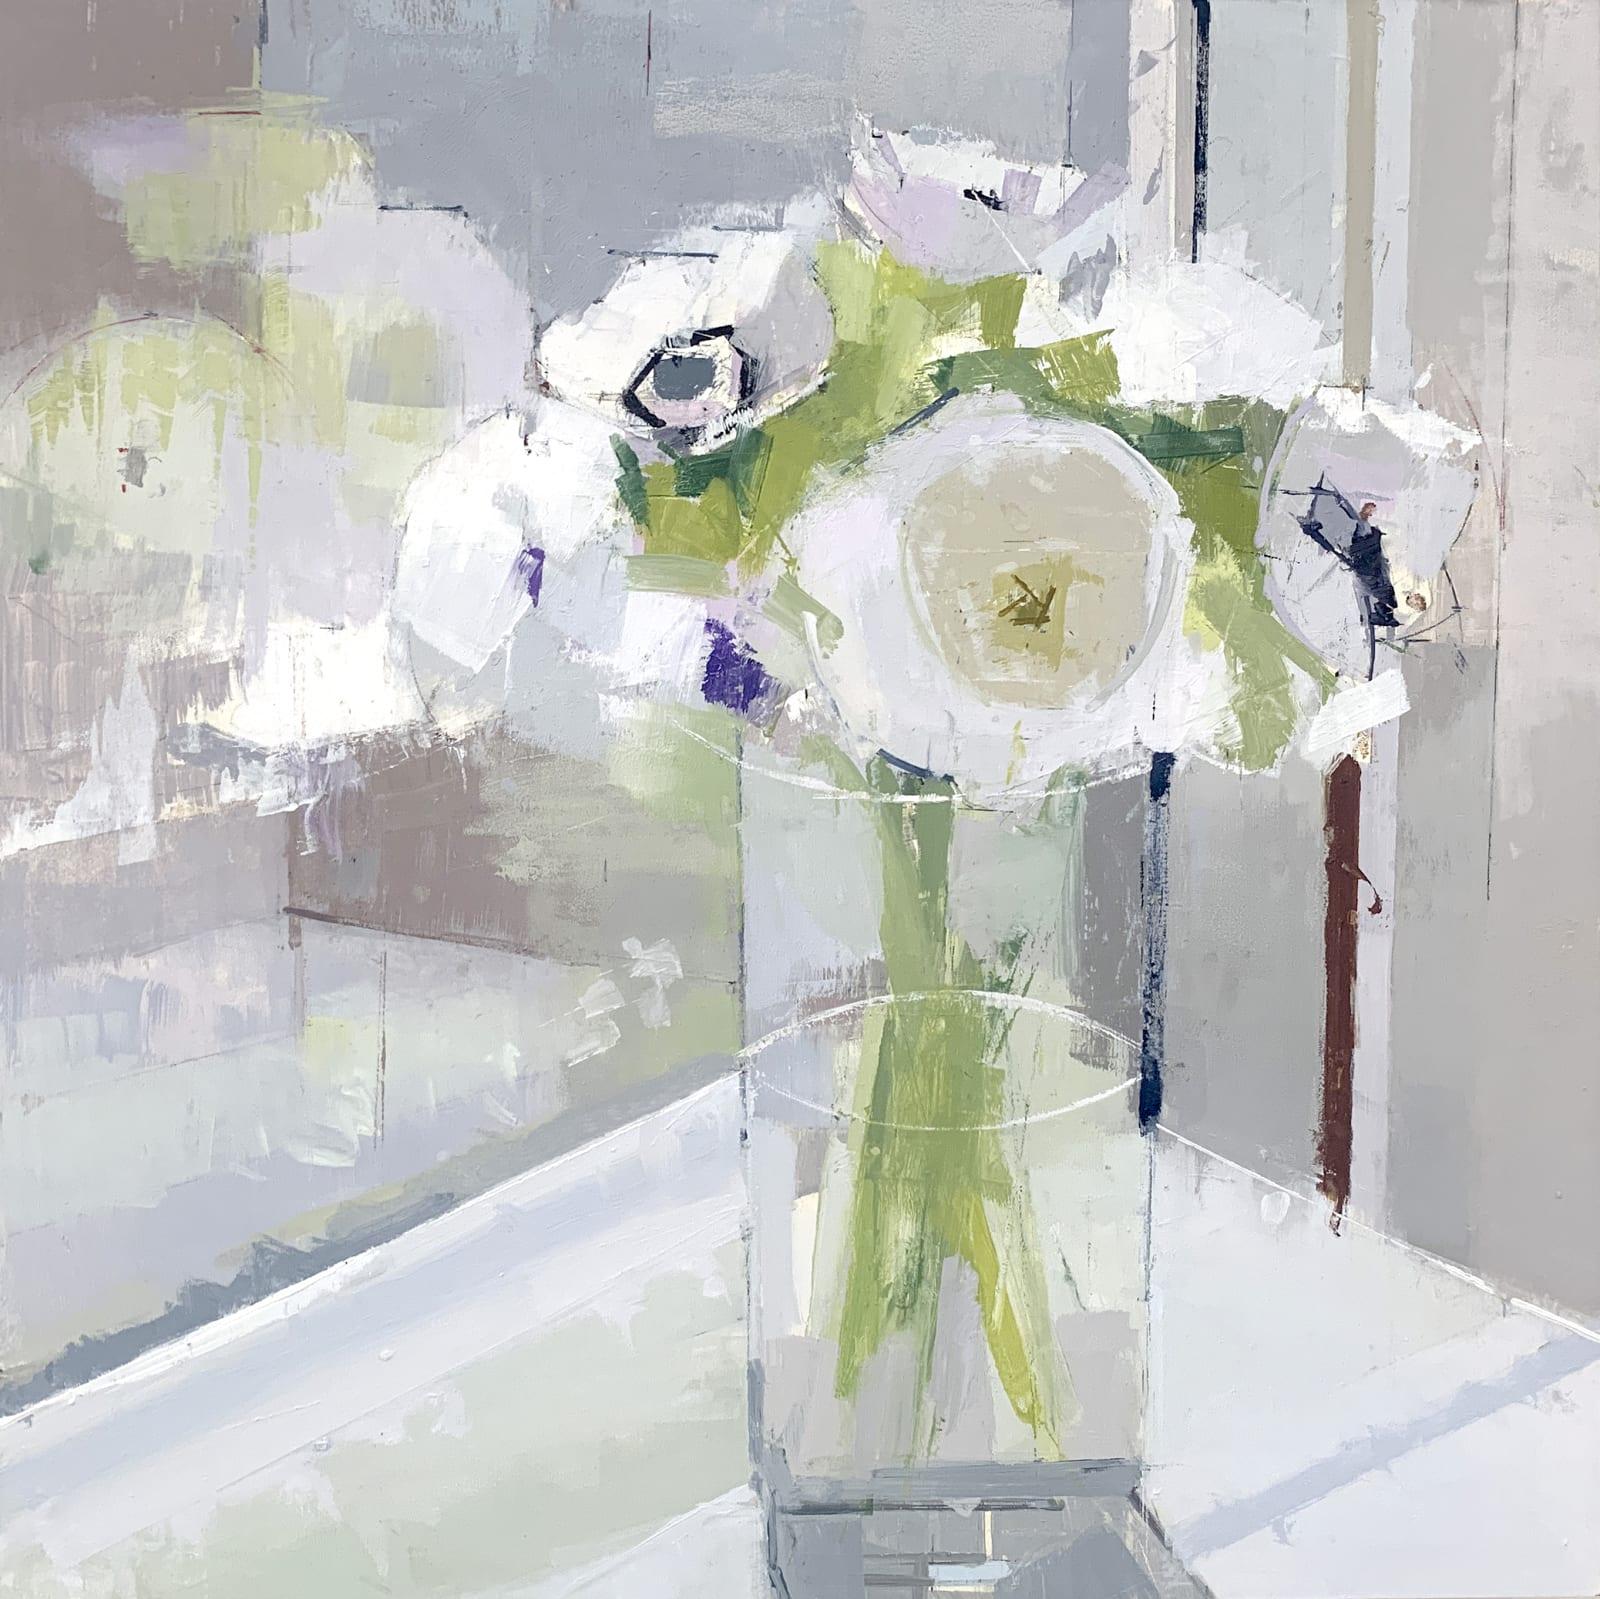 Lisa Breslow
Flower Reflections, 2020
oil and pencil on panel
16 x 16 in.
(bres291)

This beautiful still life oil painting by Lisa Breslow features white flowers on a sunny windowsill, rendered with loose painterly brushstrokes.

Both the natural